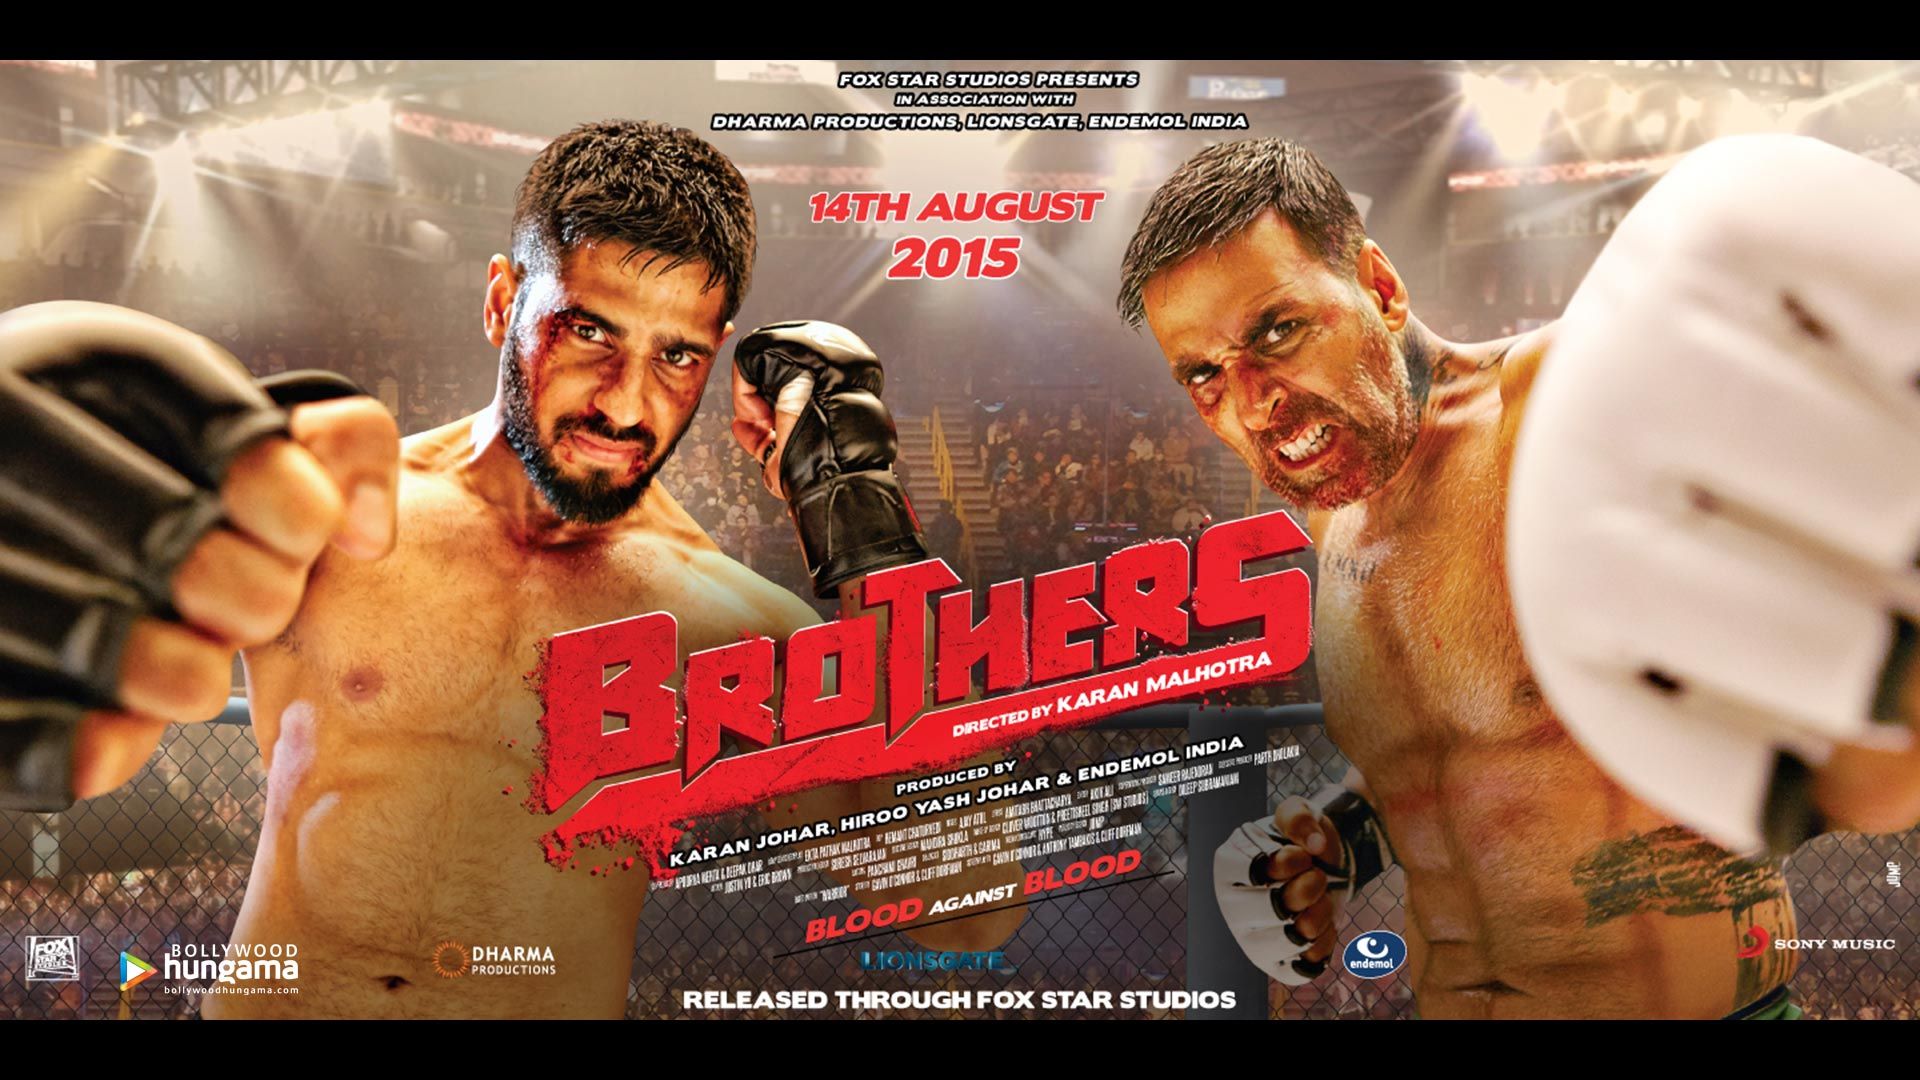 Brothers 2015 Wallpaper. Brothers 3